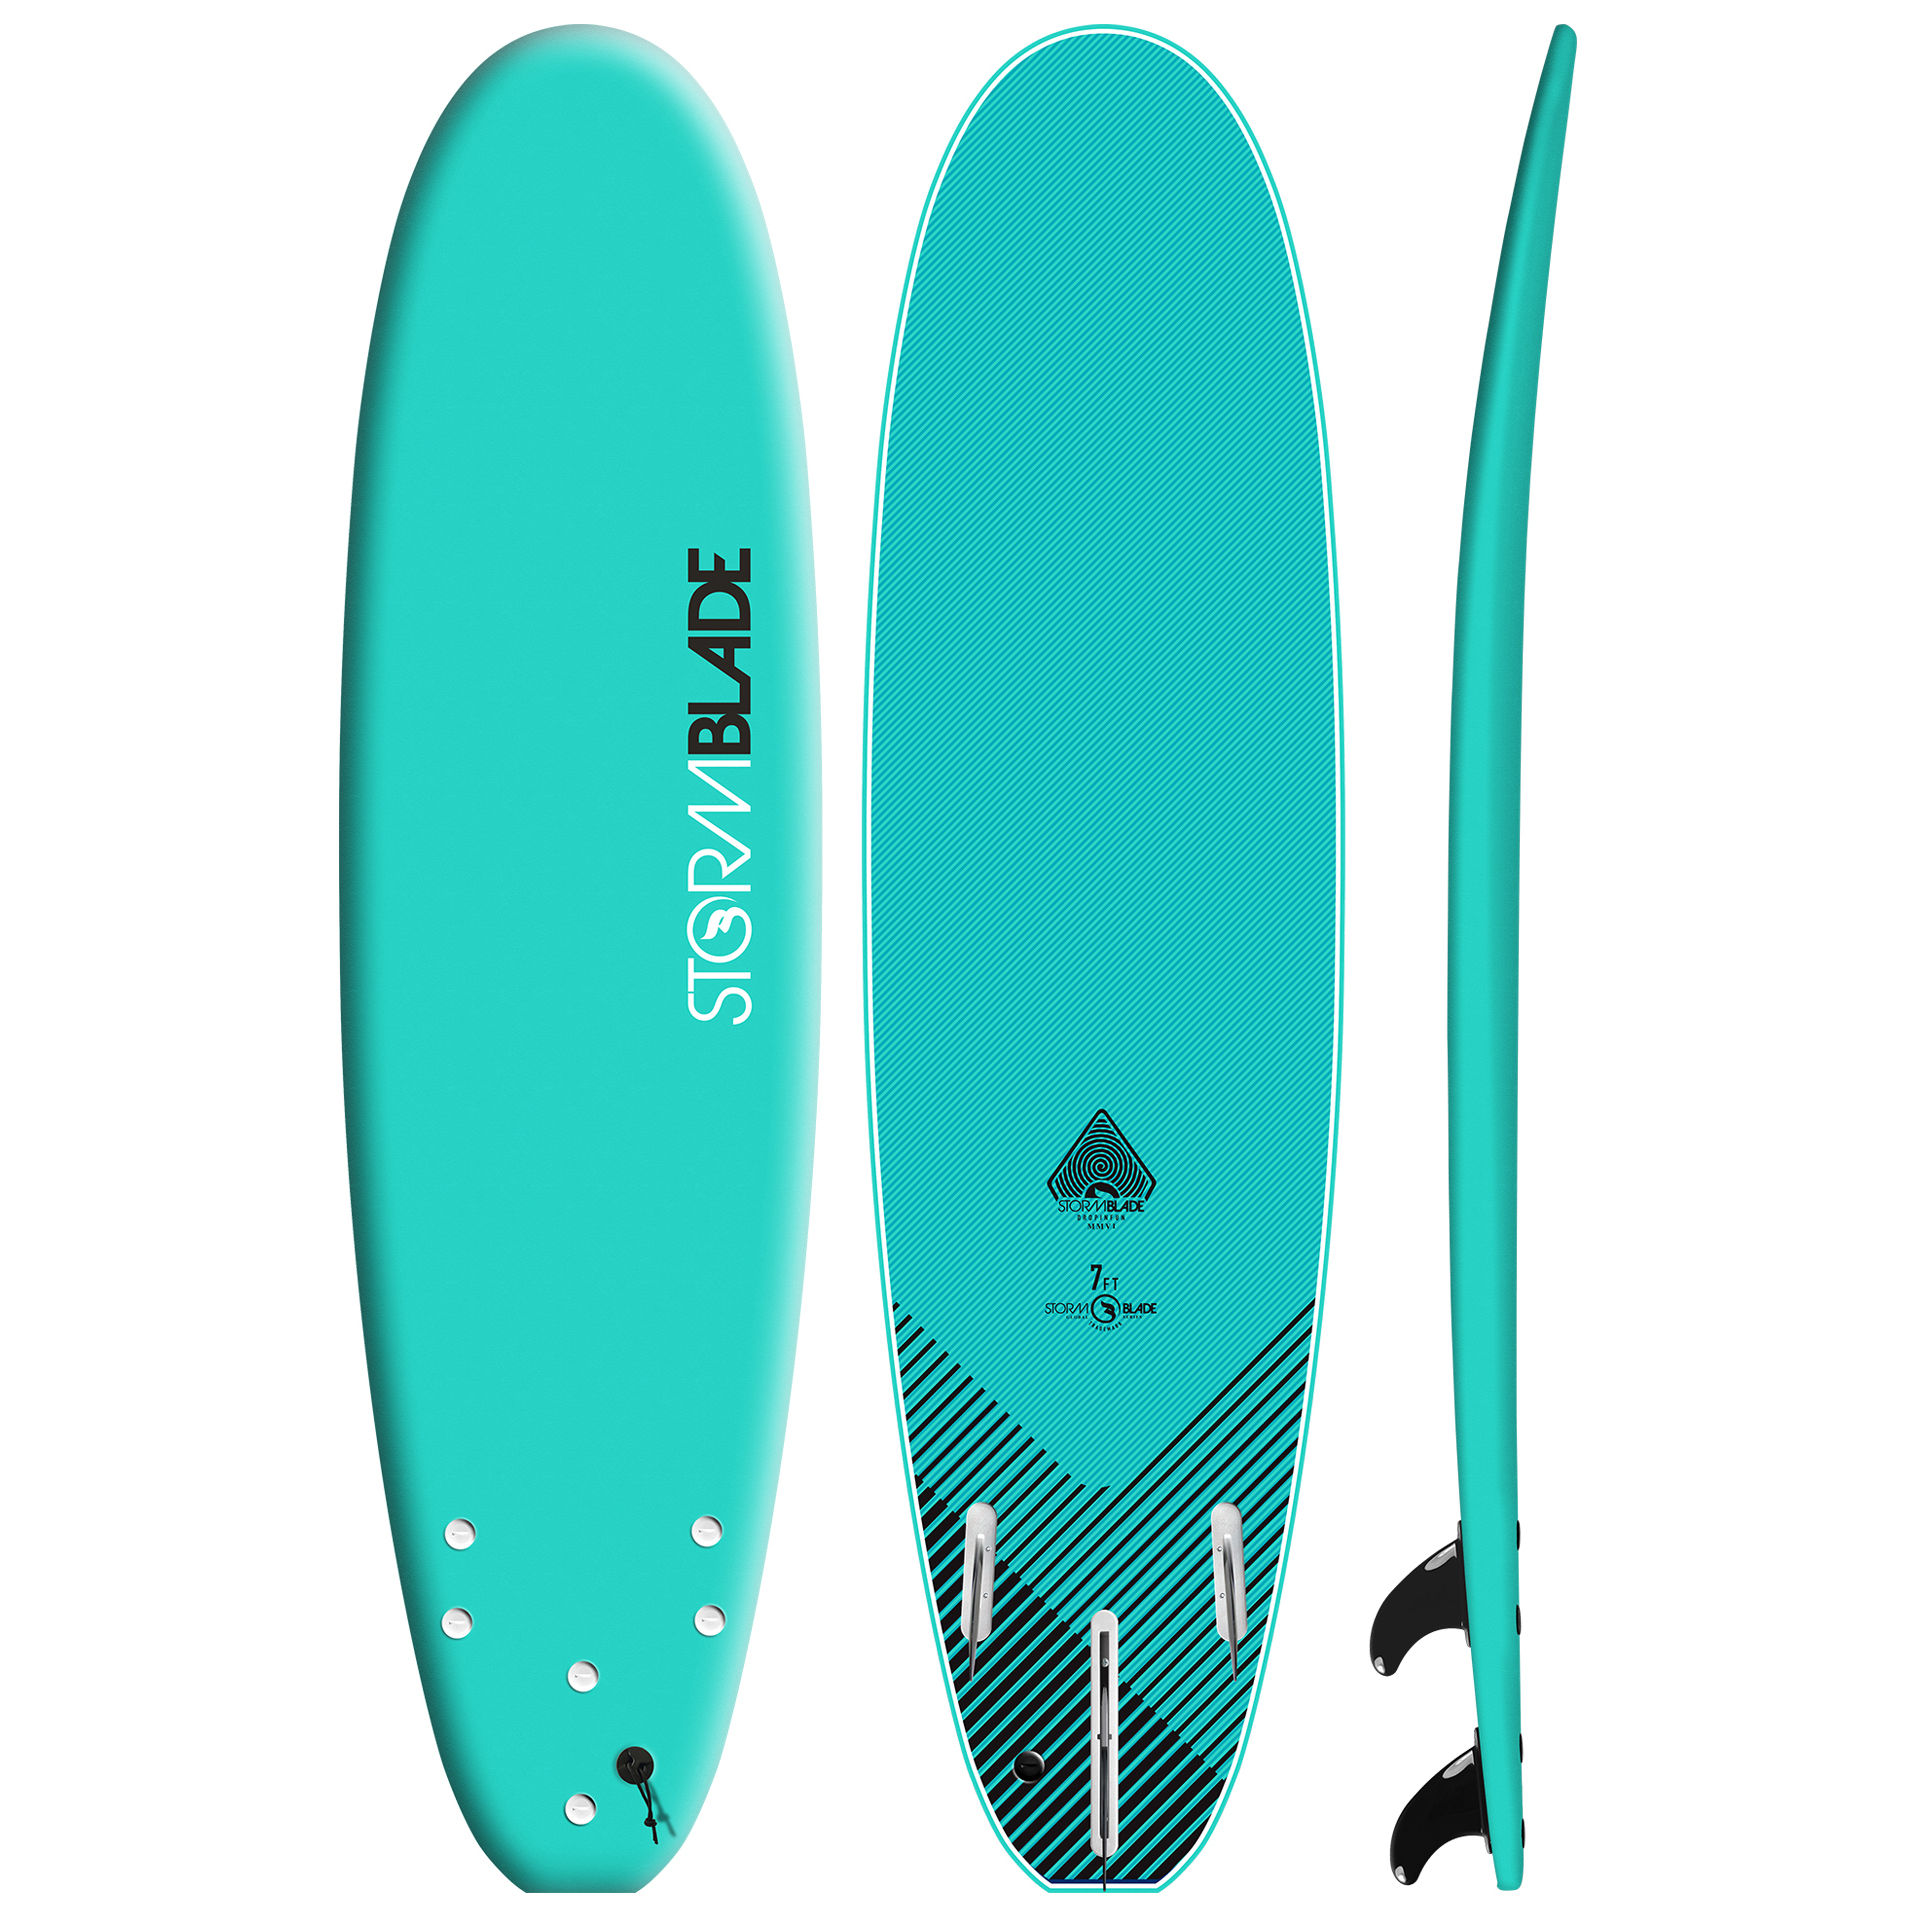 STORM BLADE 7ft SURFBOARD – TURQUOISE